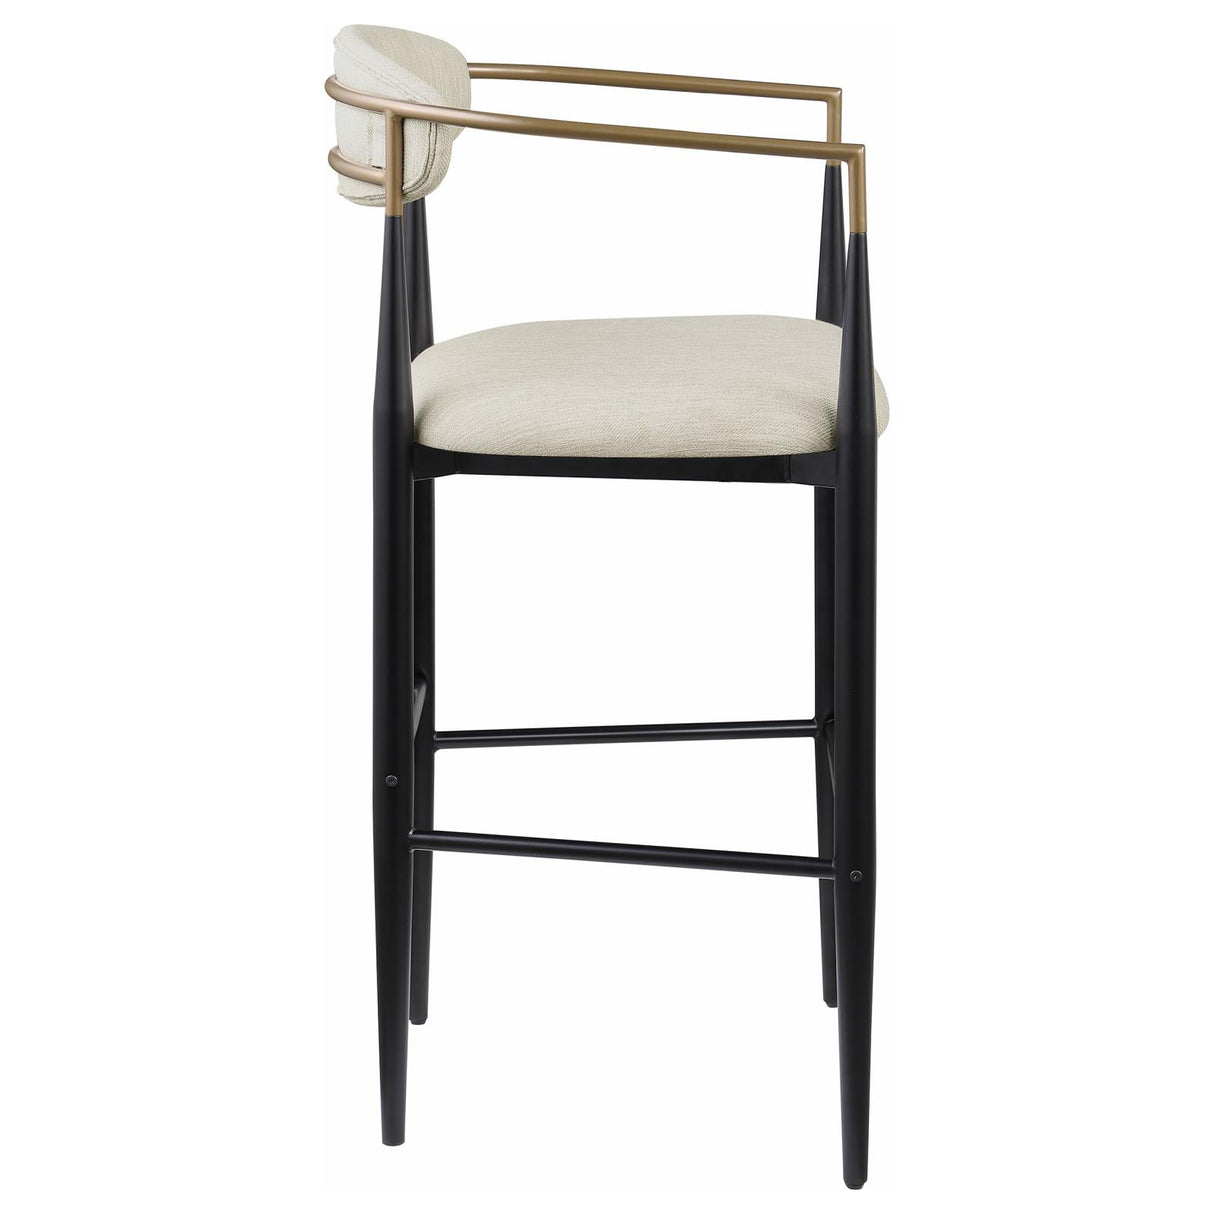 Tina Metal Pub Height Bar Stool with Upholstered Back and Seat Beige (Set of 2) - 121187 - Luna Furniture